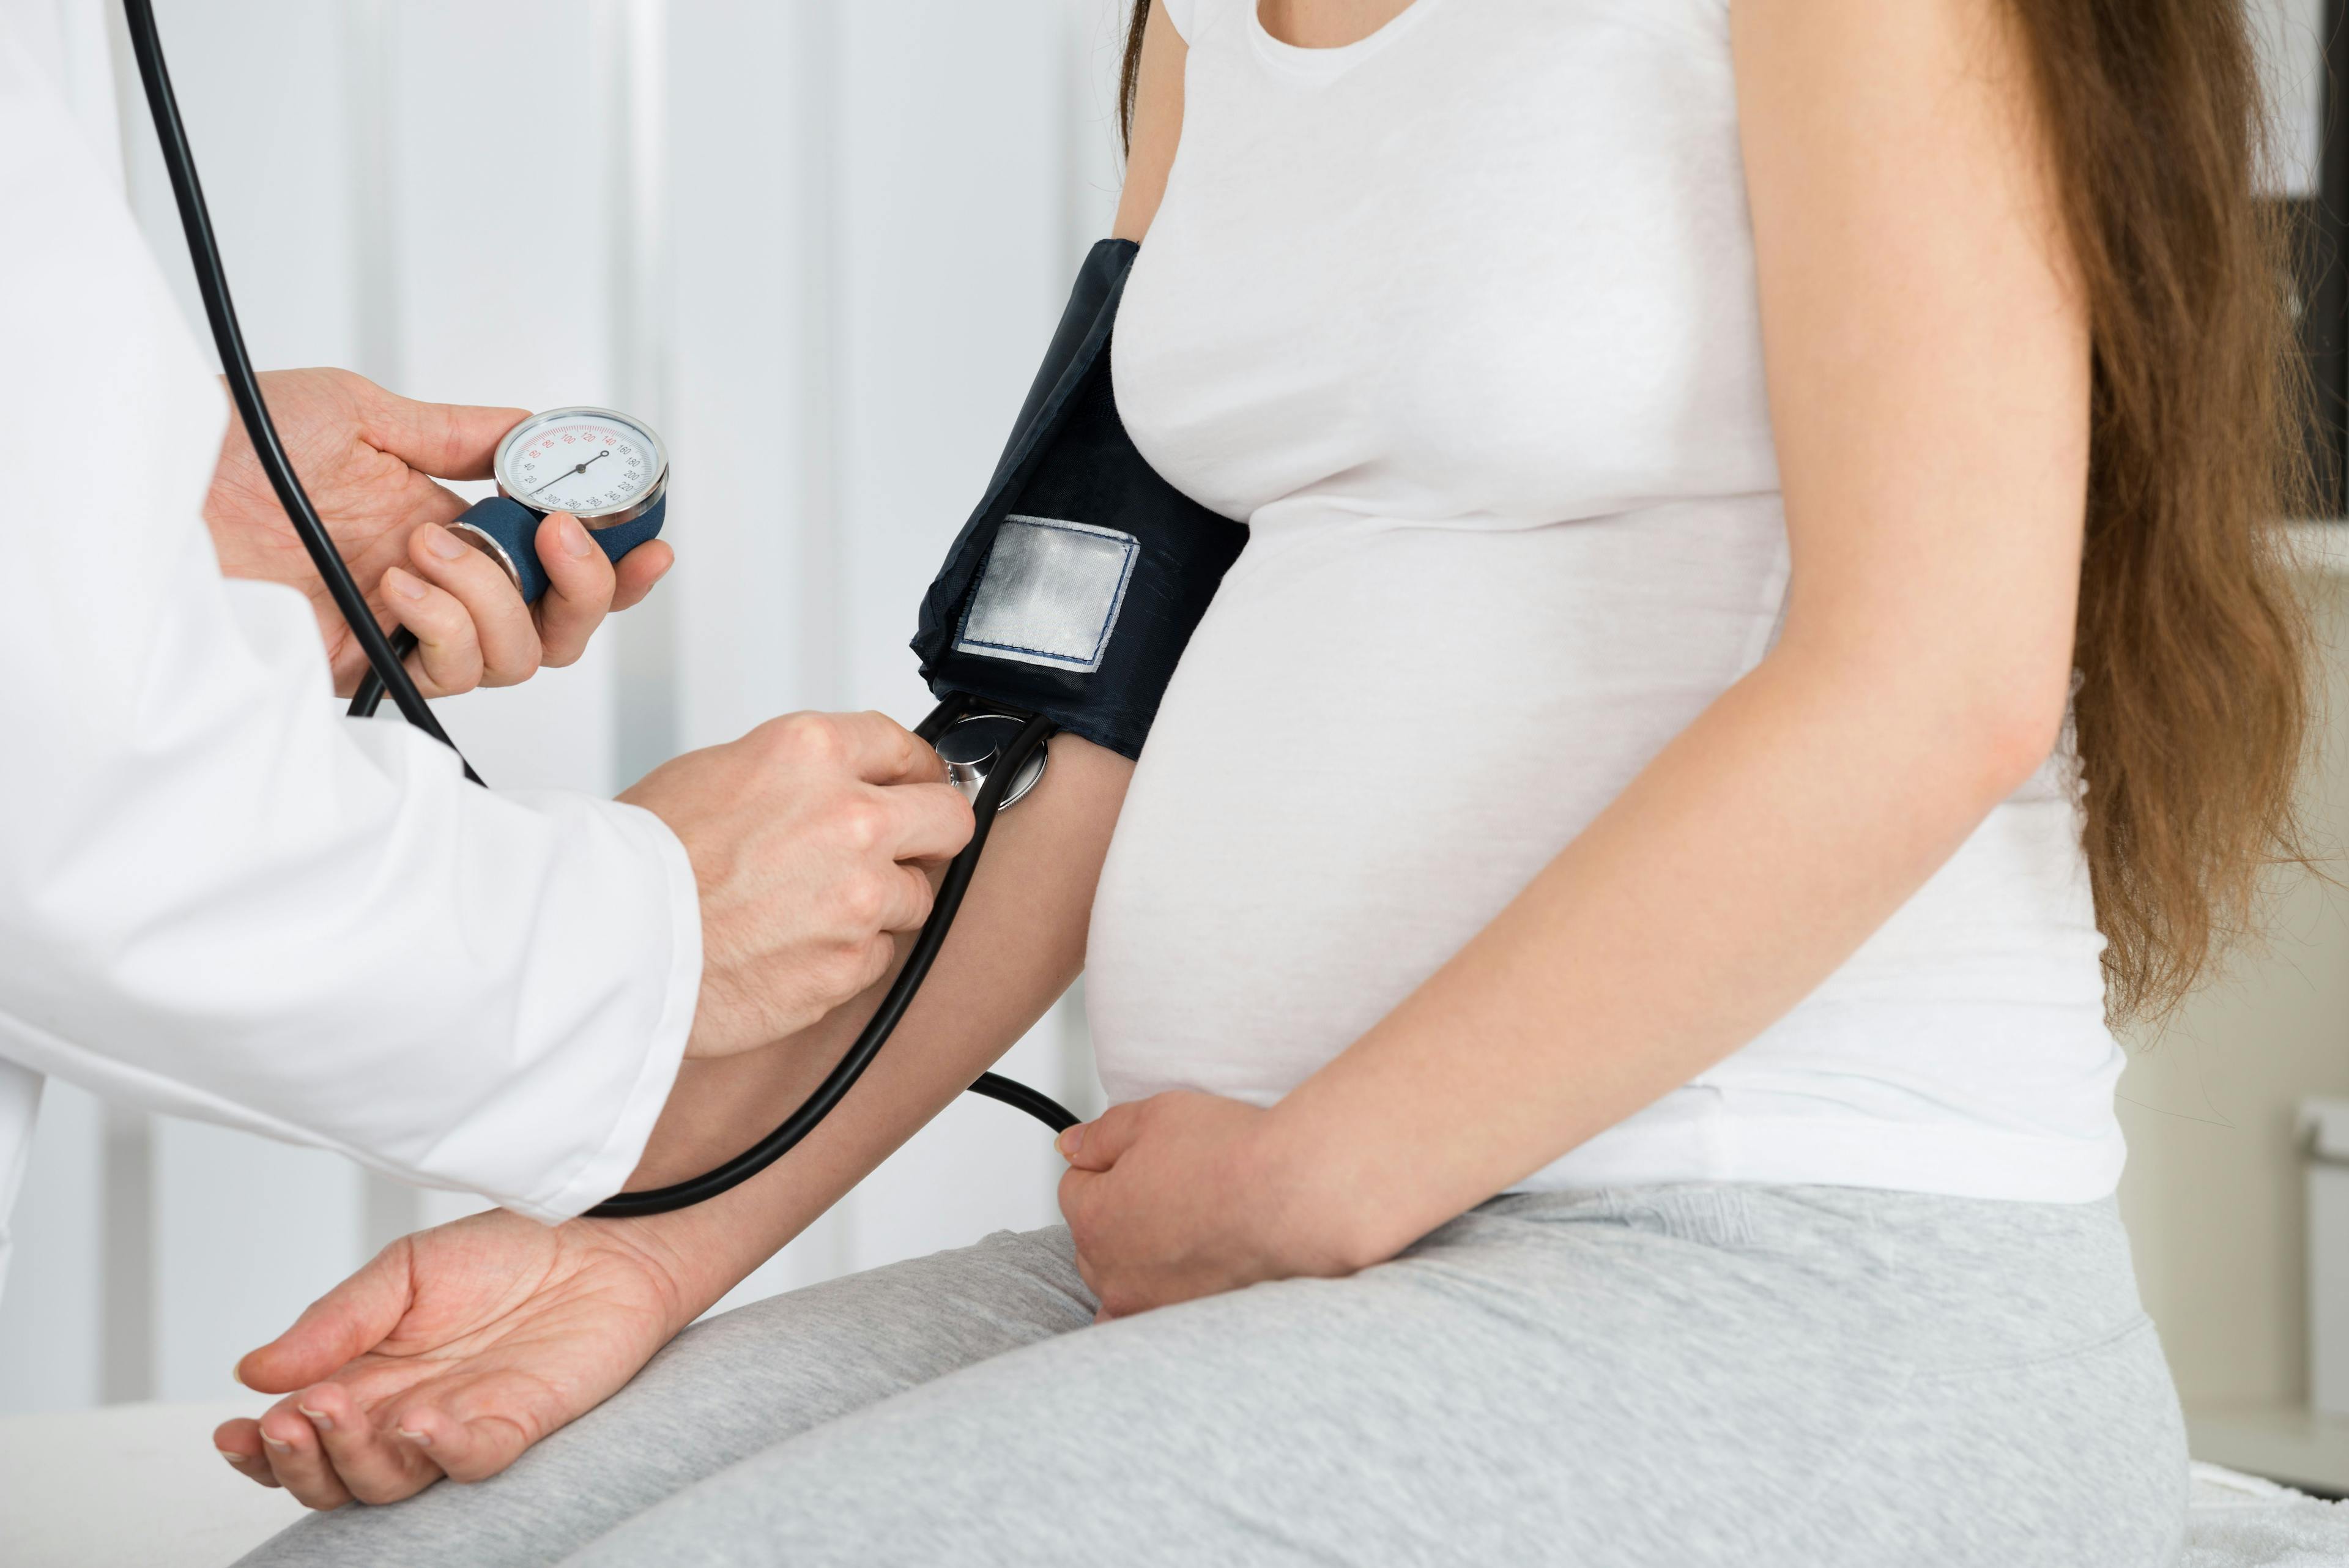 Deep dive into hypertensive disorders in pregnancy